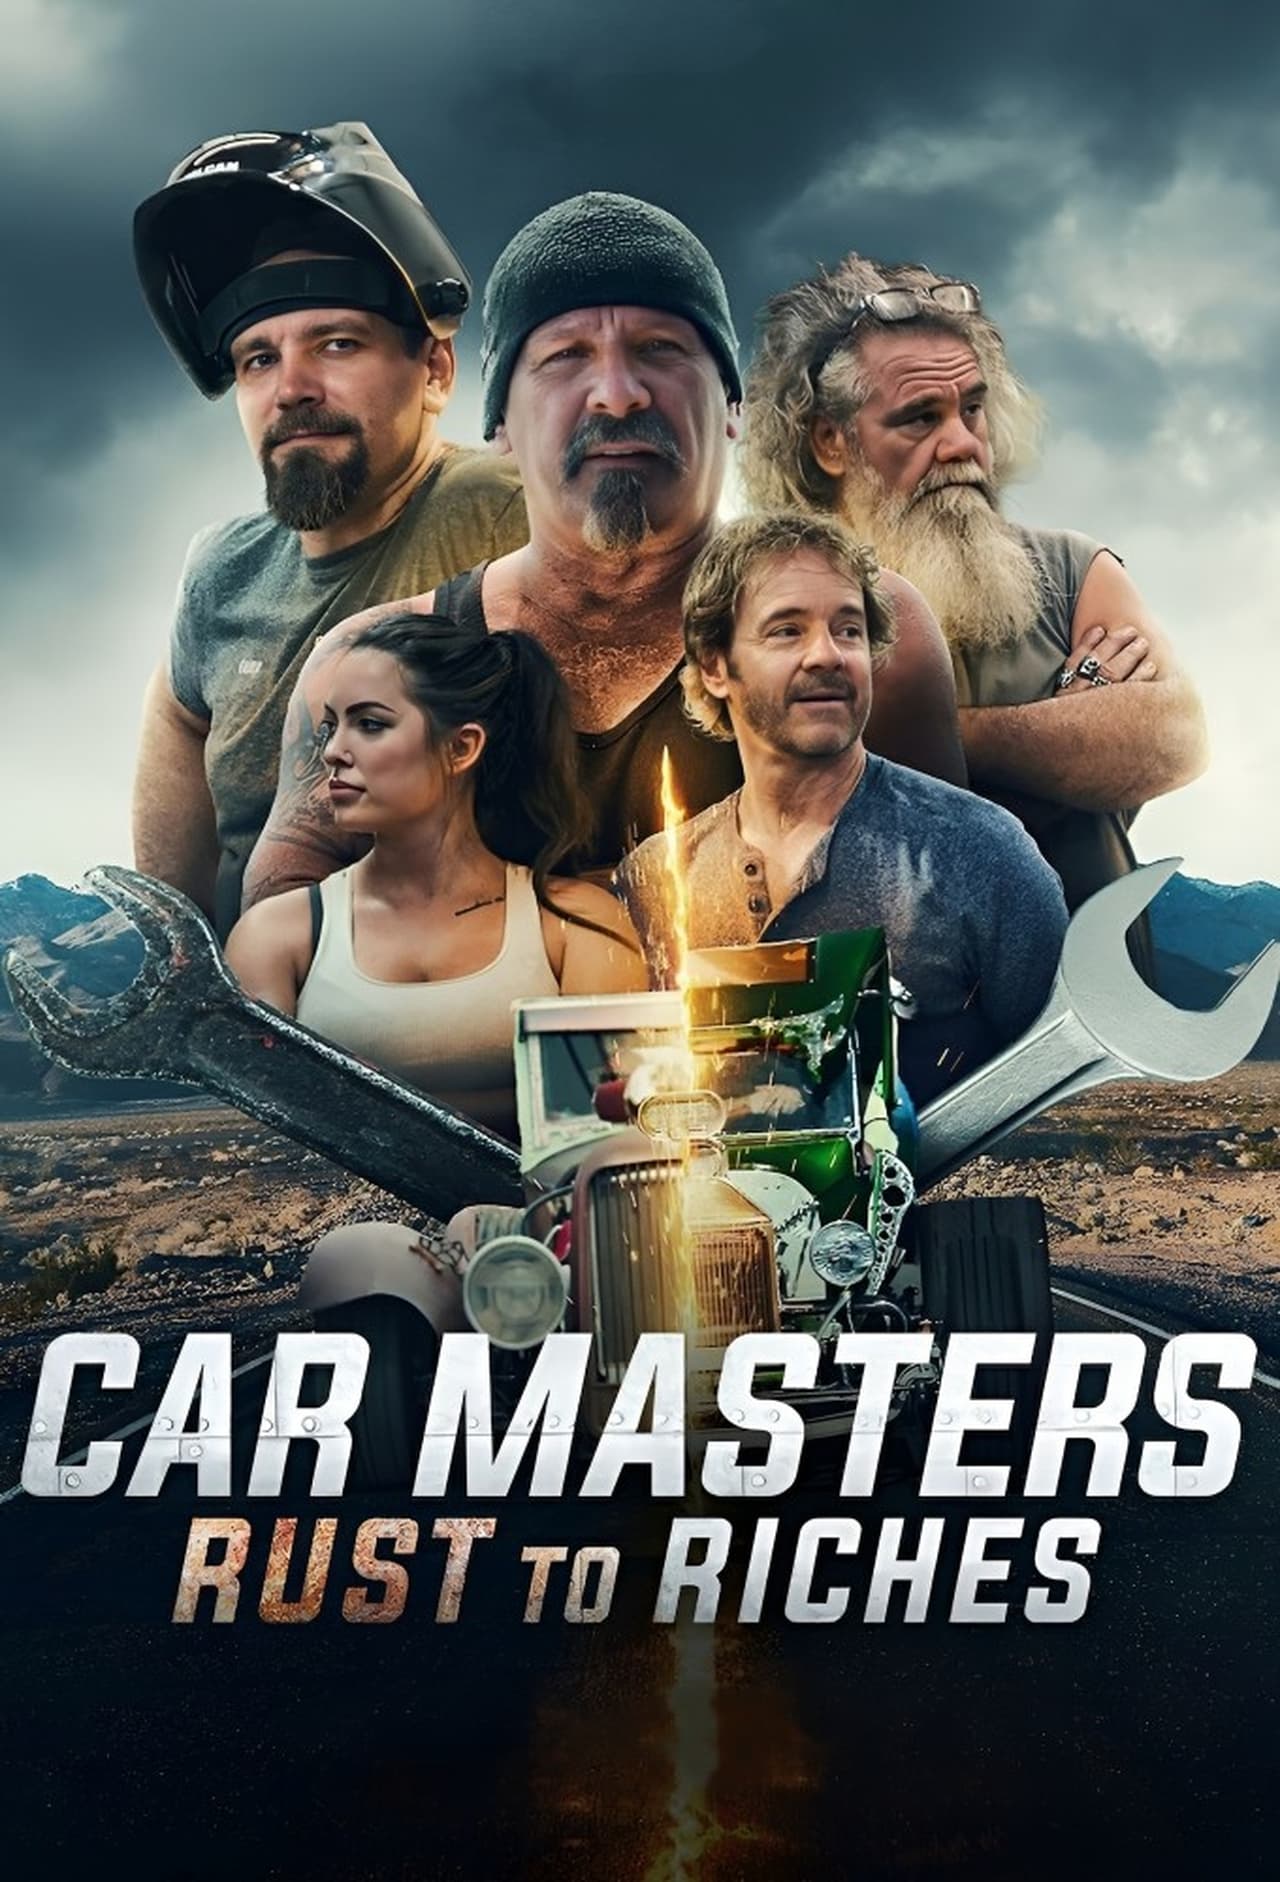 Car Masters: Rust to Riches (2018) S1 EP01&EP08 640Kbps 23.976Fps 48Khz 5.1Ch DD+ NF E-AC3 Turkish Audio TAC